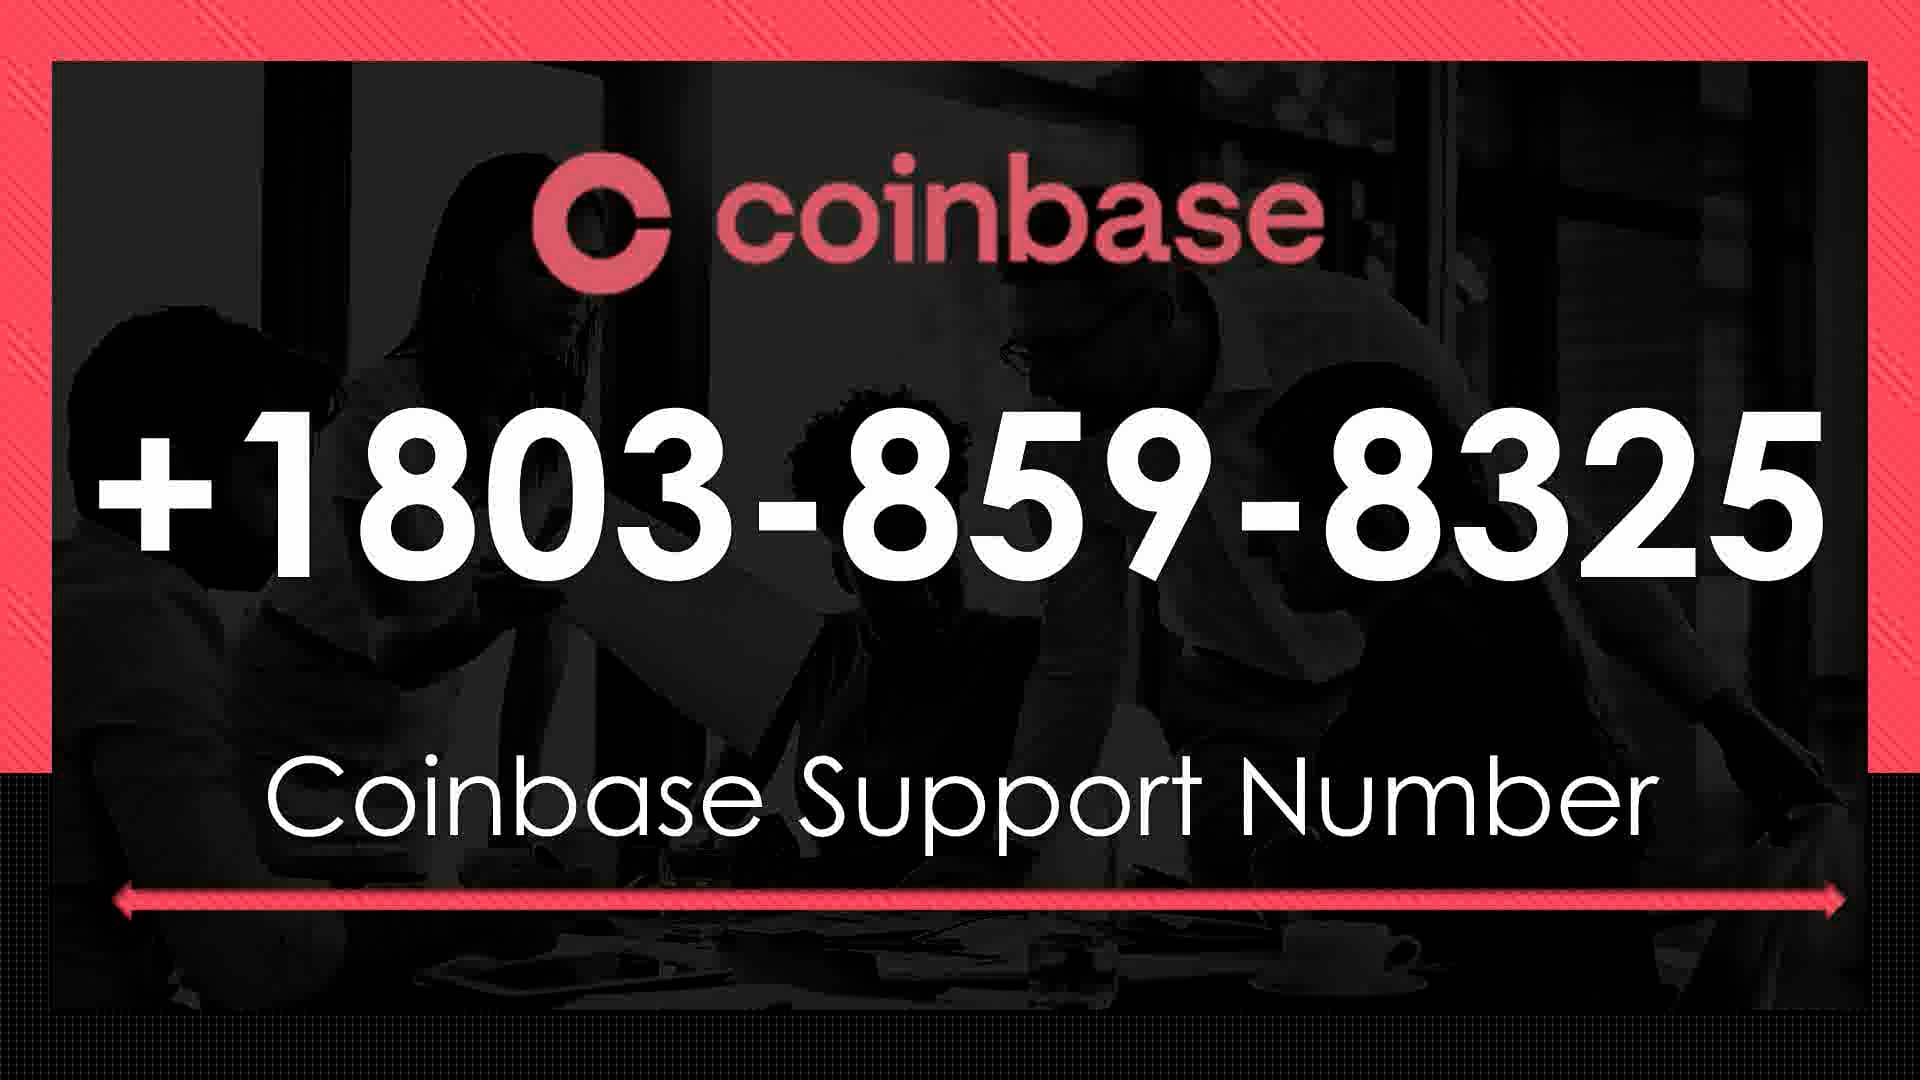 Coinbase Supp0rt Number +1+803+859+8325+ D21$ (97) on Vimeo